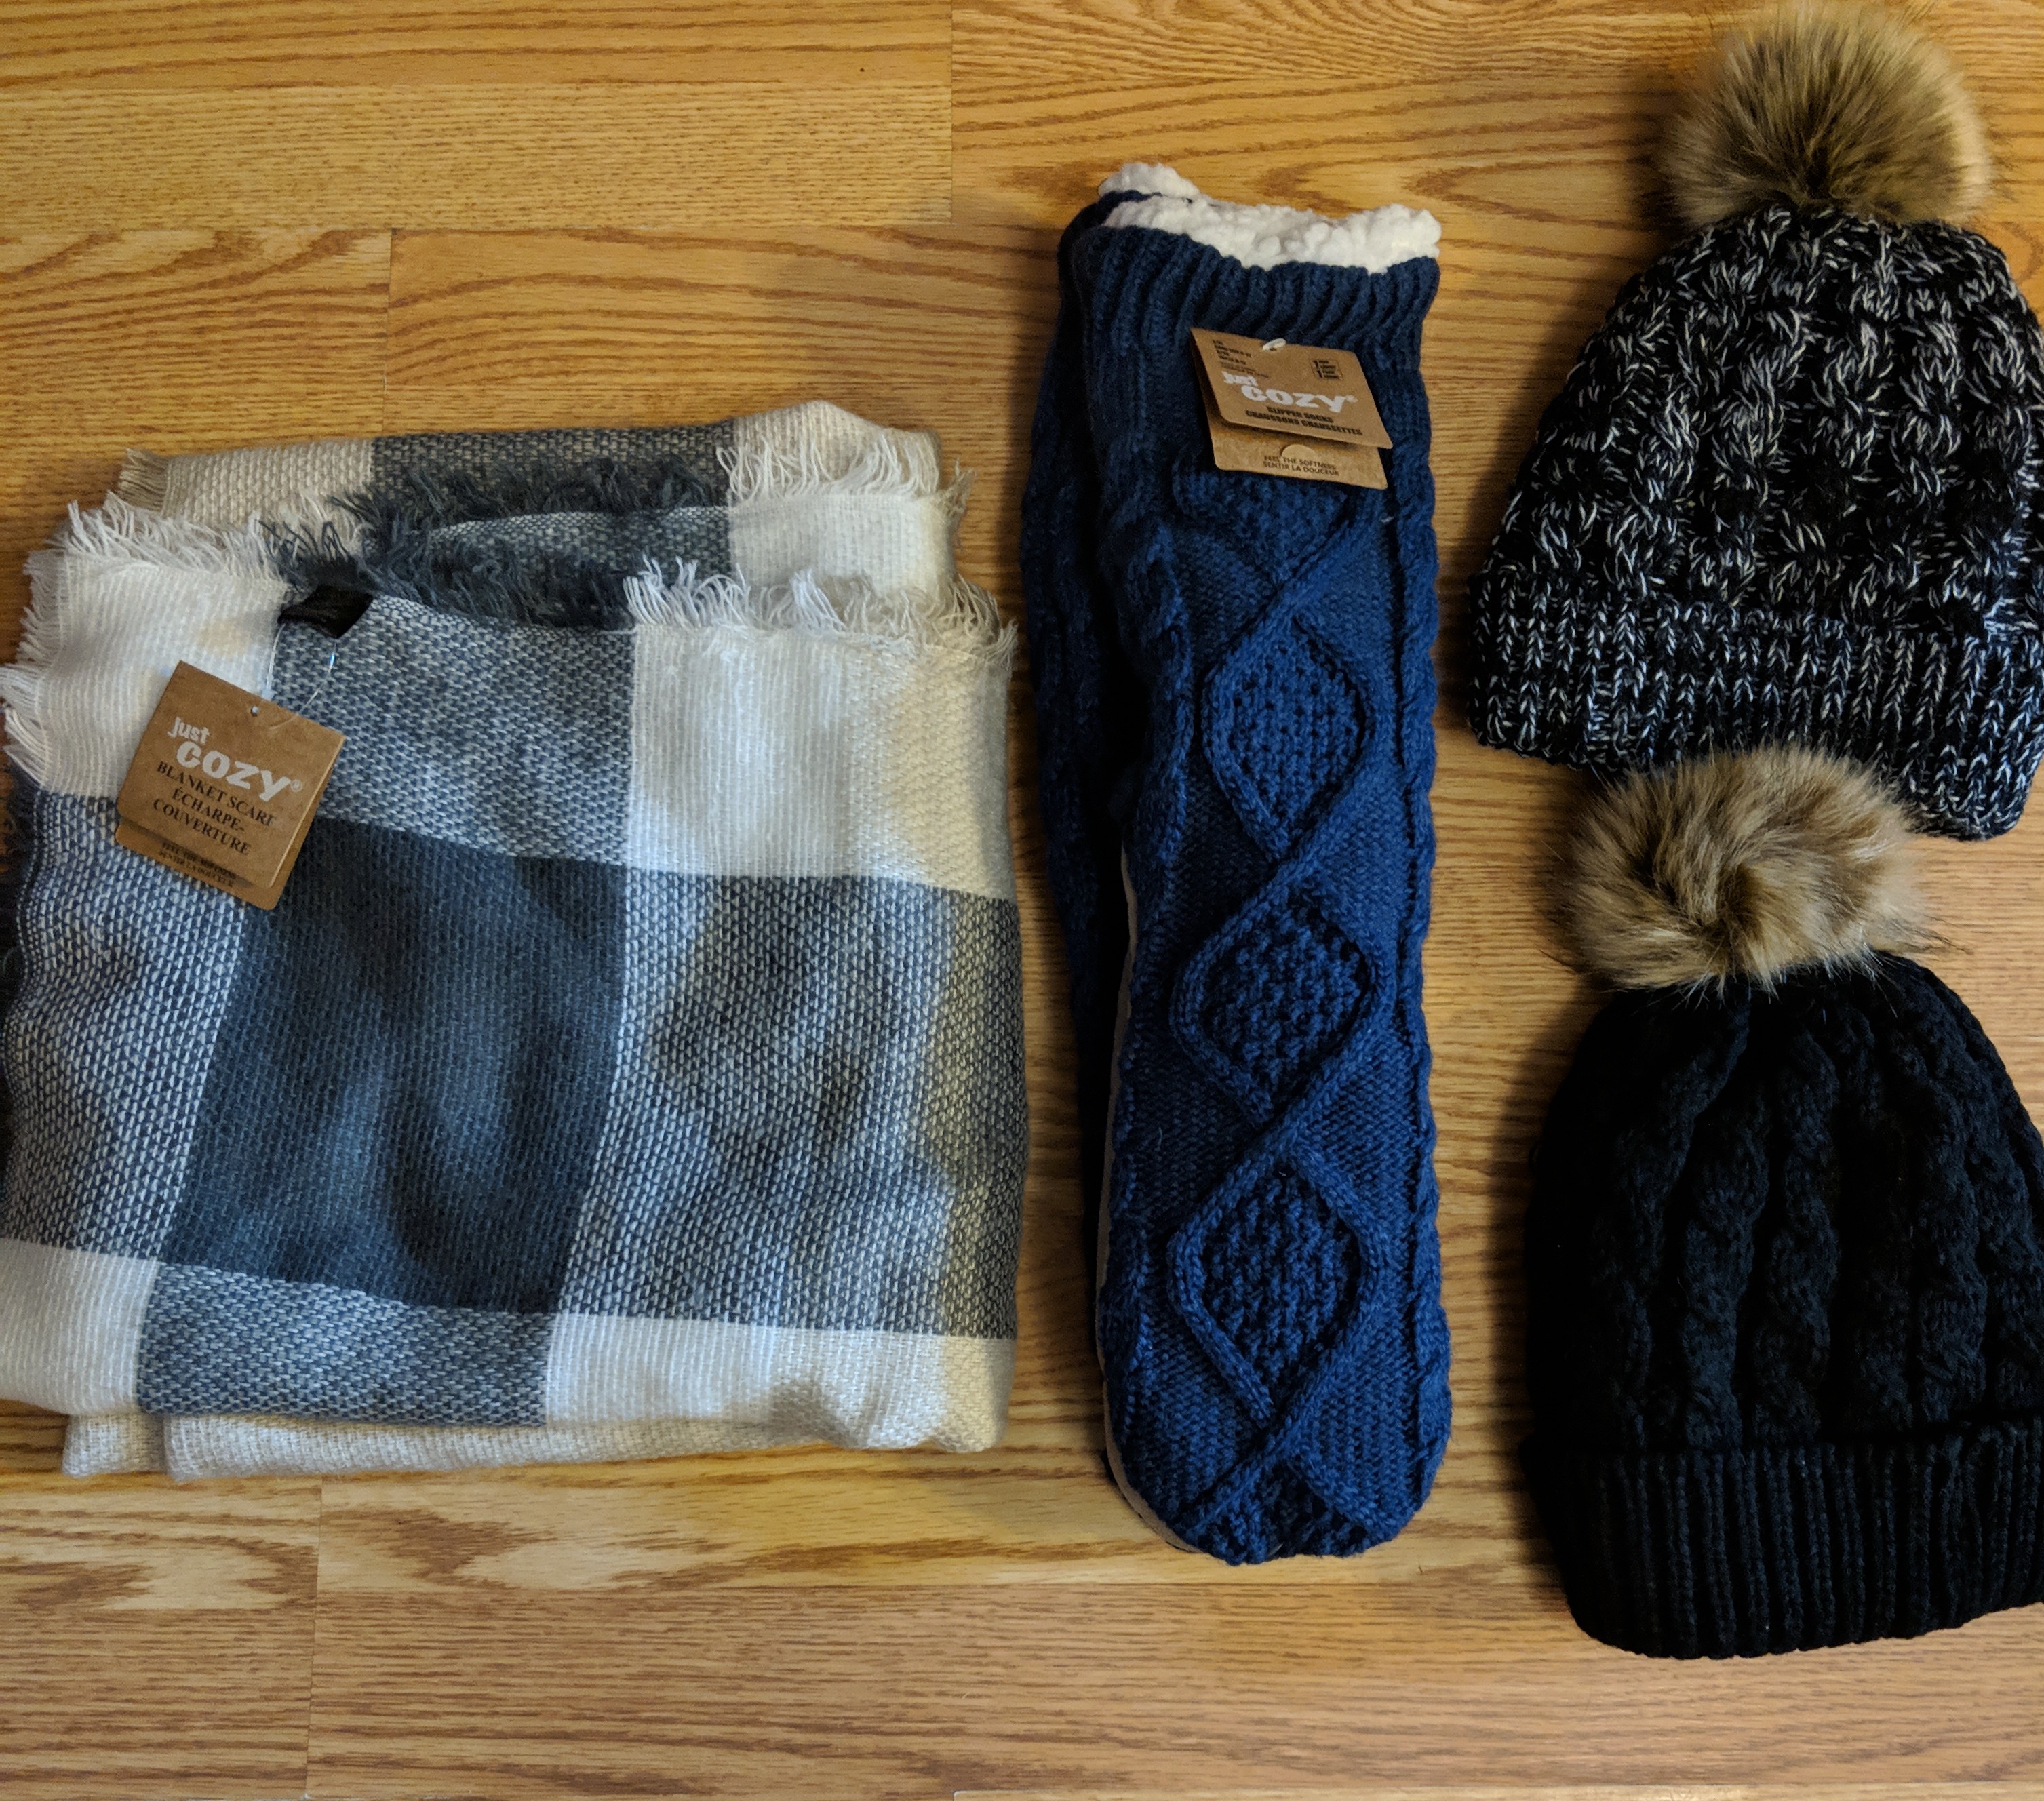 Everything is $10 each at Just Cozy - KP mall, and probably other ones too!  - Save Money in Winnipeg